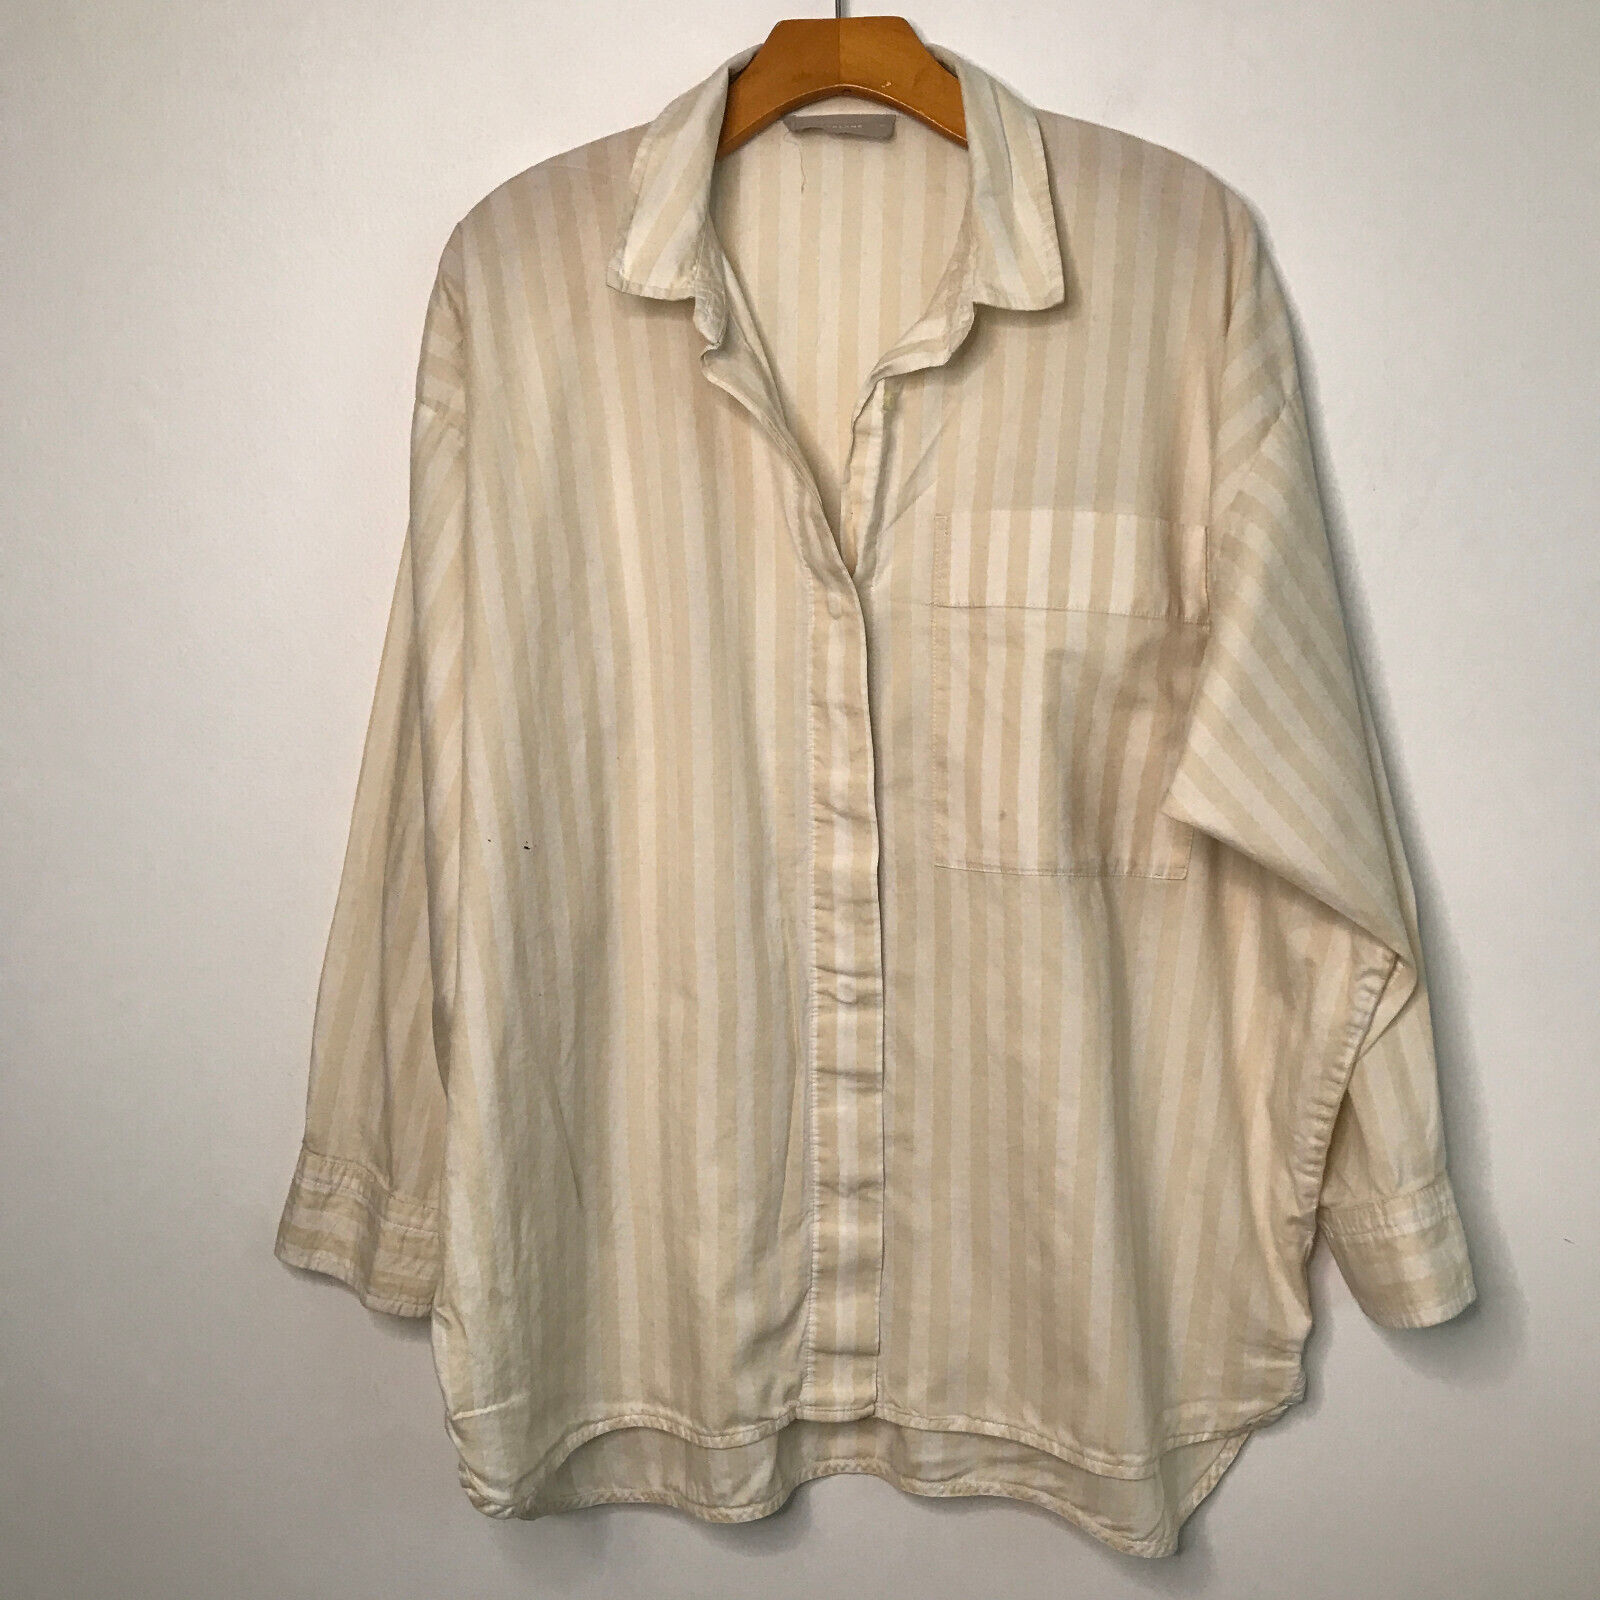 Primary image for Everlane Shirt M Ivory Stripe Long Sleeve Button Down Slouchy Blouse